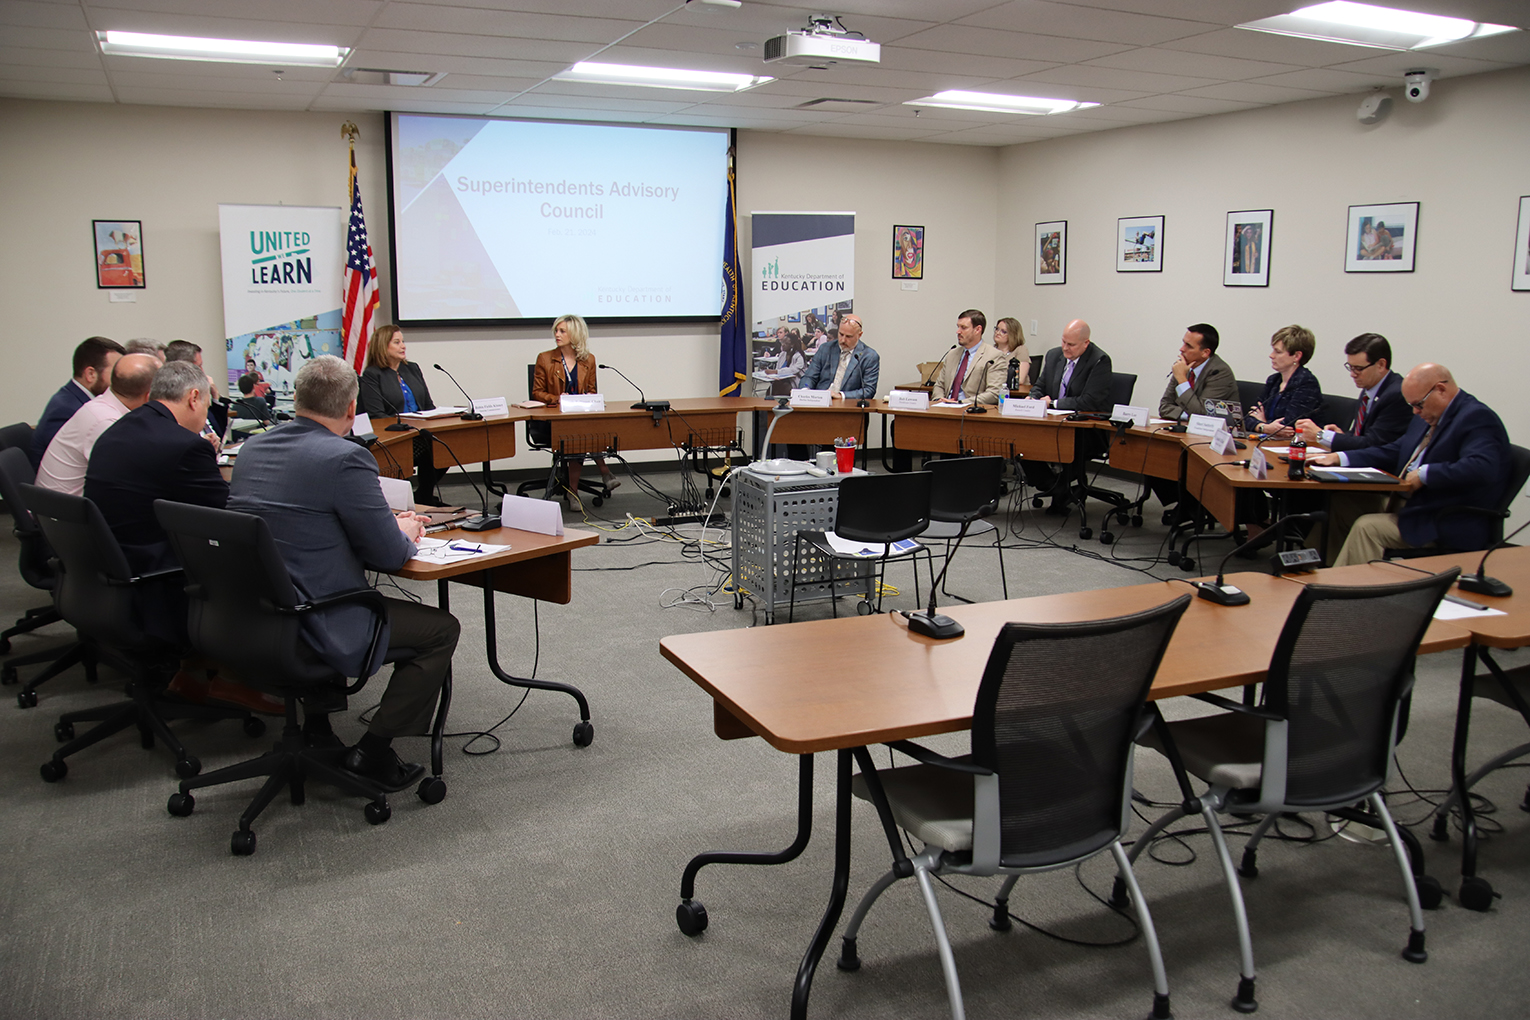 Members of the Superintendents Advisory Council meet